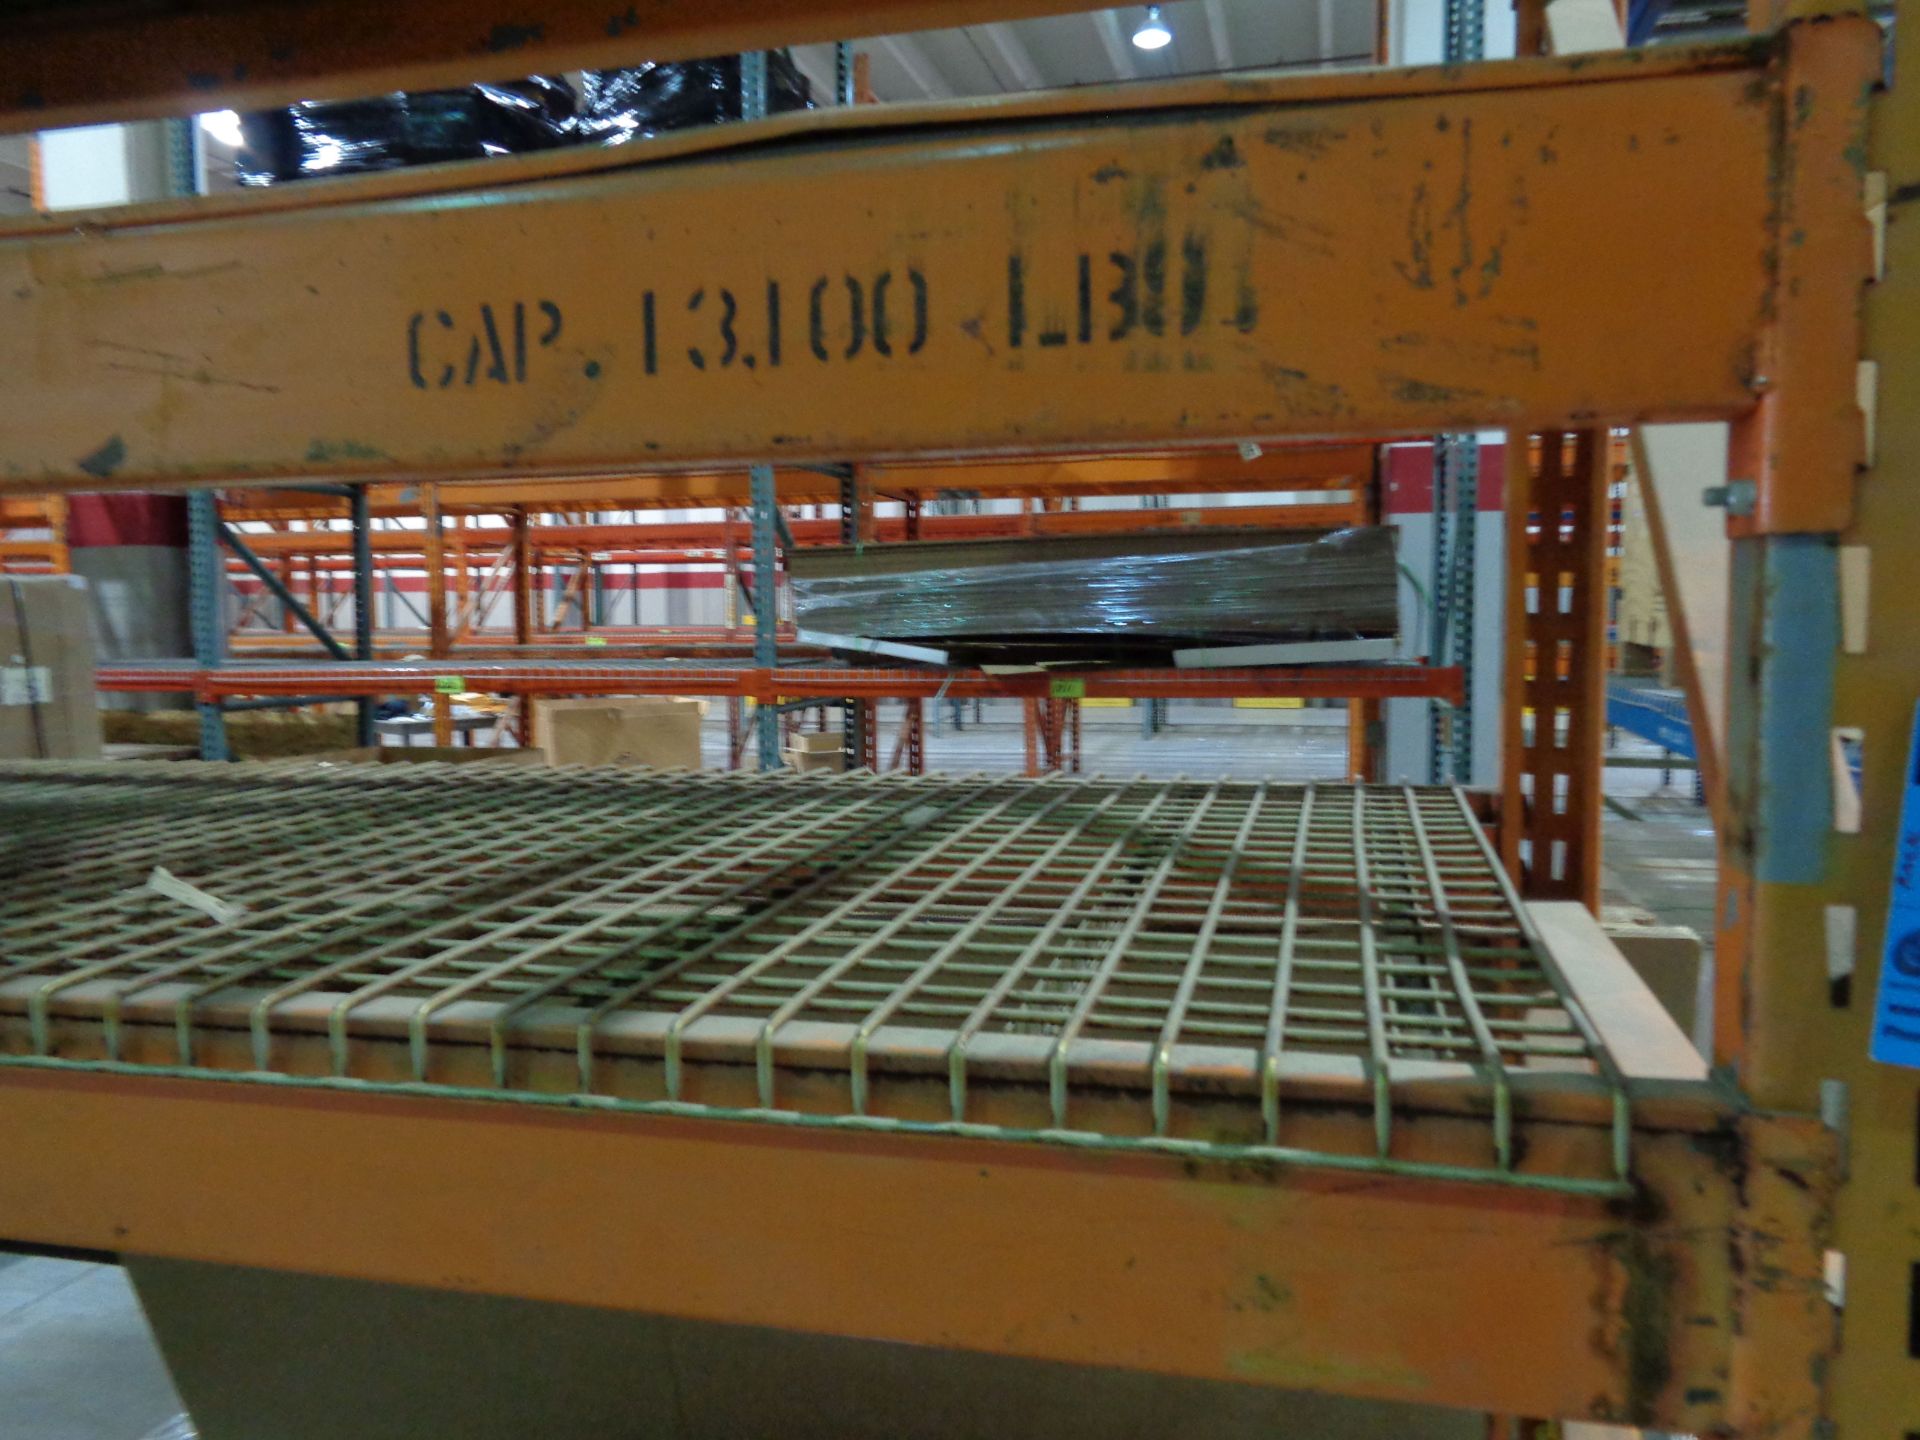 SECTIONS 42" X 108" X 16' HIGH PALLET RACK WITH WIRE DECKING, (6) SHELVES, 6" WIDE STEP BEAMS - Image 3 of 3